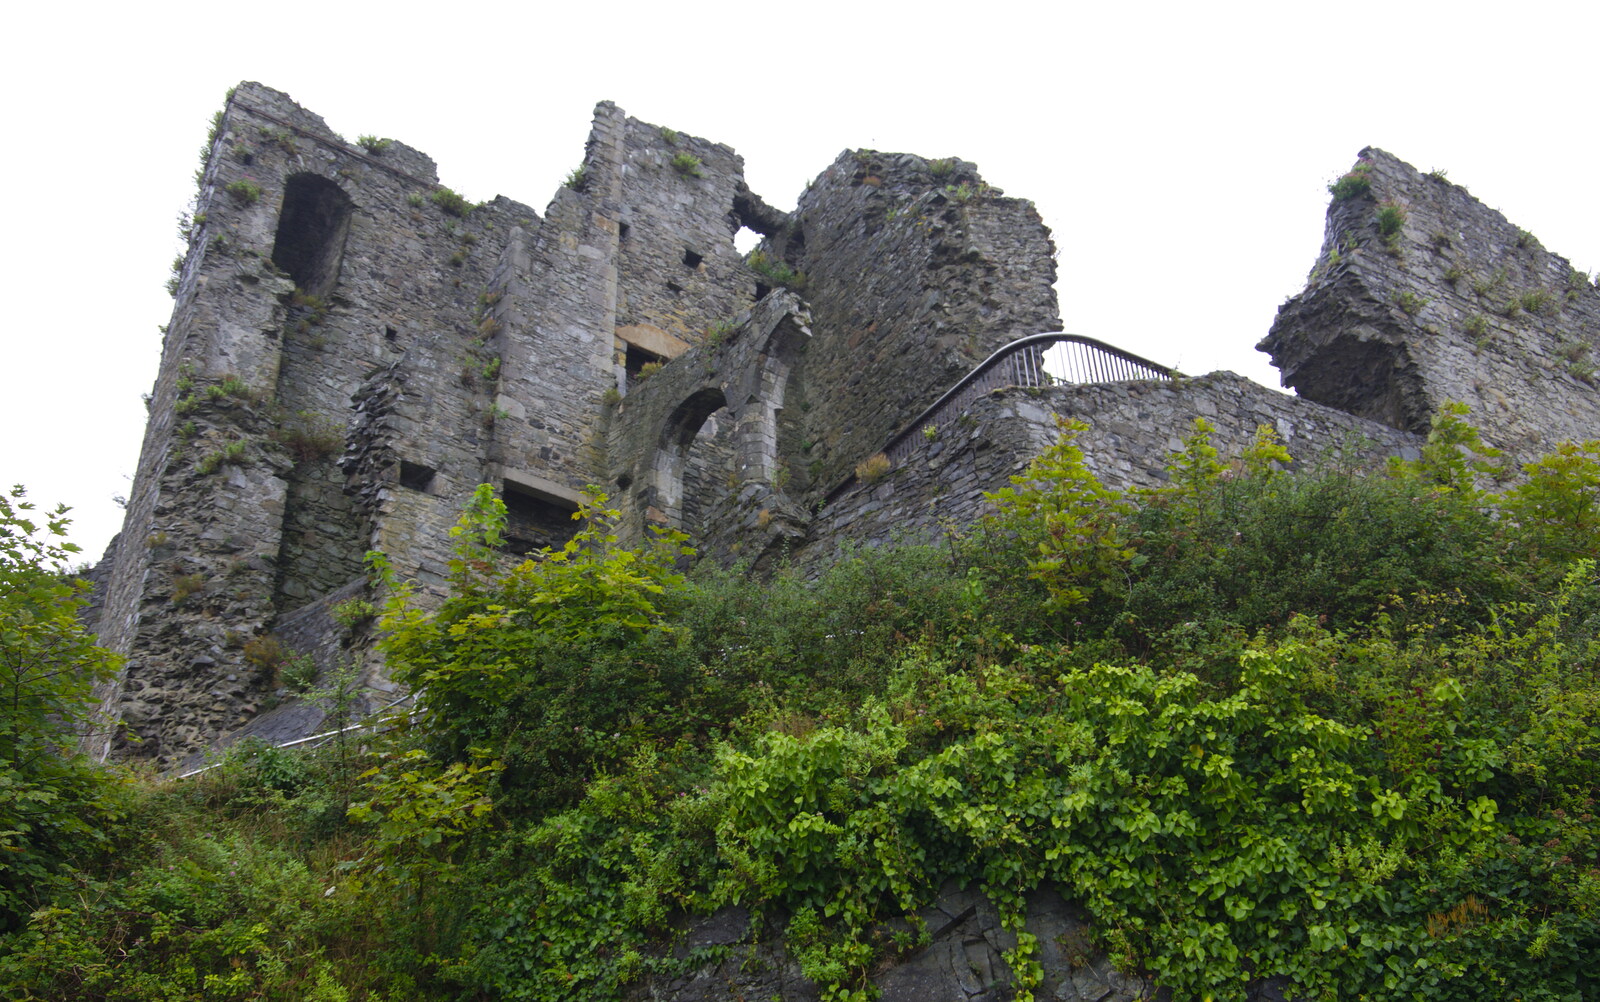 Carlingford Castle, sadly no longer accessible from The Giant's Causeway, Bushmills, County Antrim, Northern Ireland - 14th August 2019